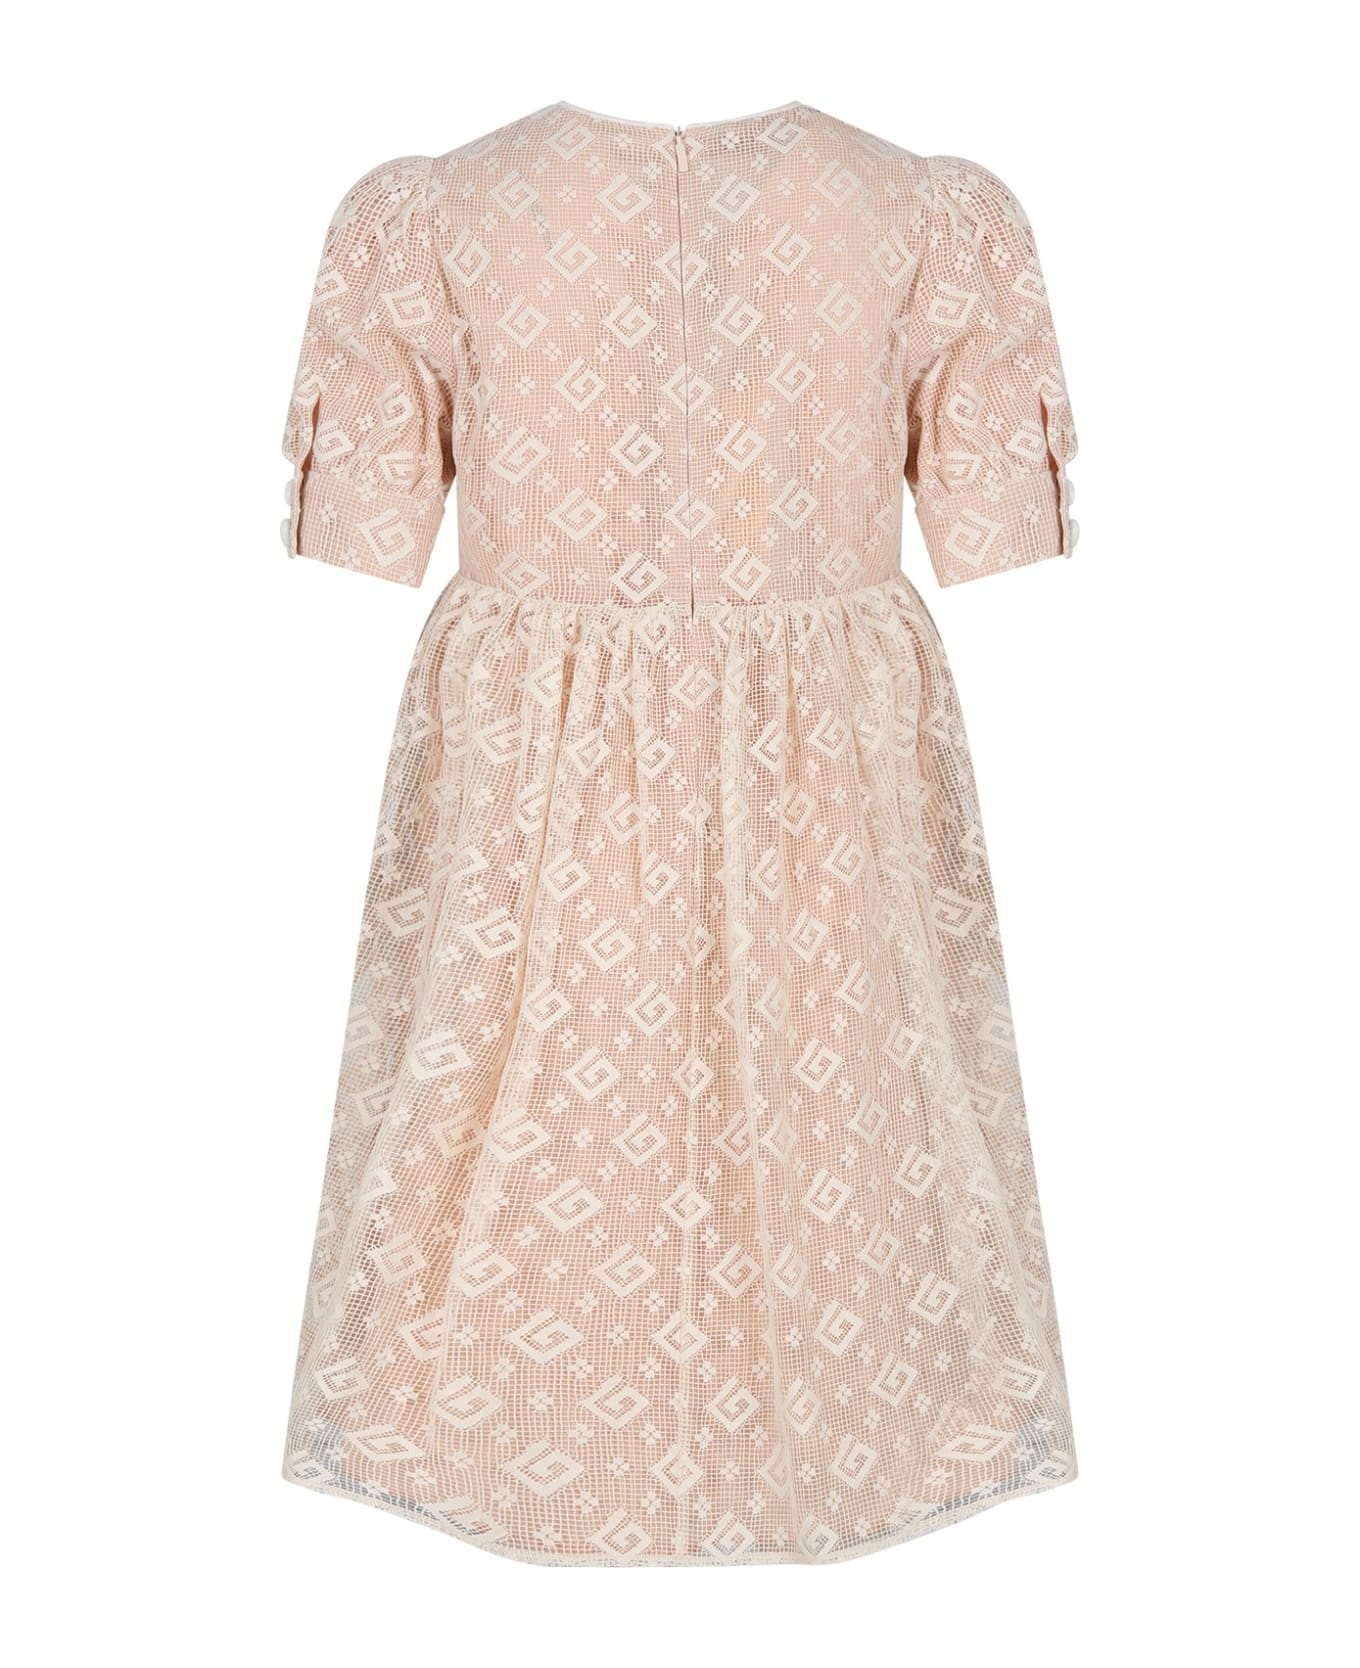 Gucci Pink Dress For Girl With G Quadro Motif - Pink